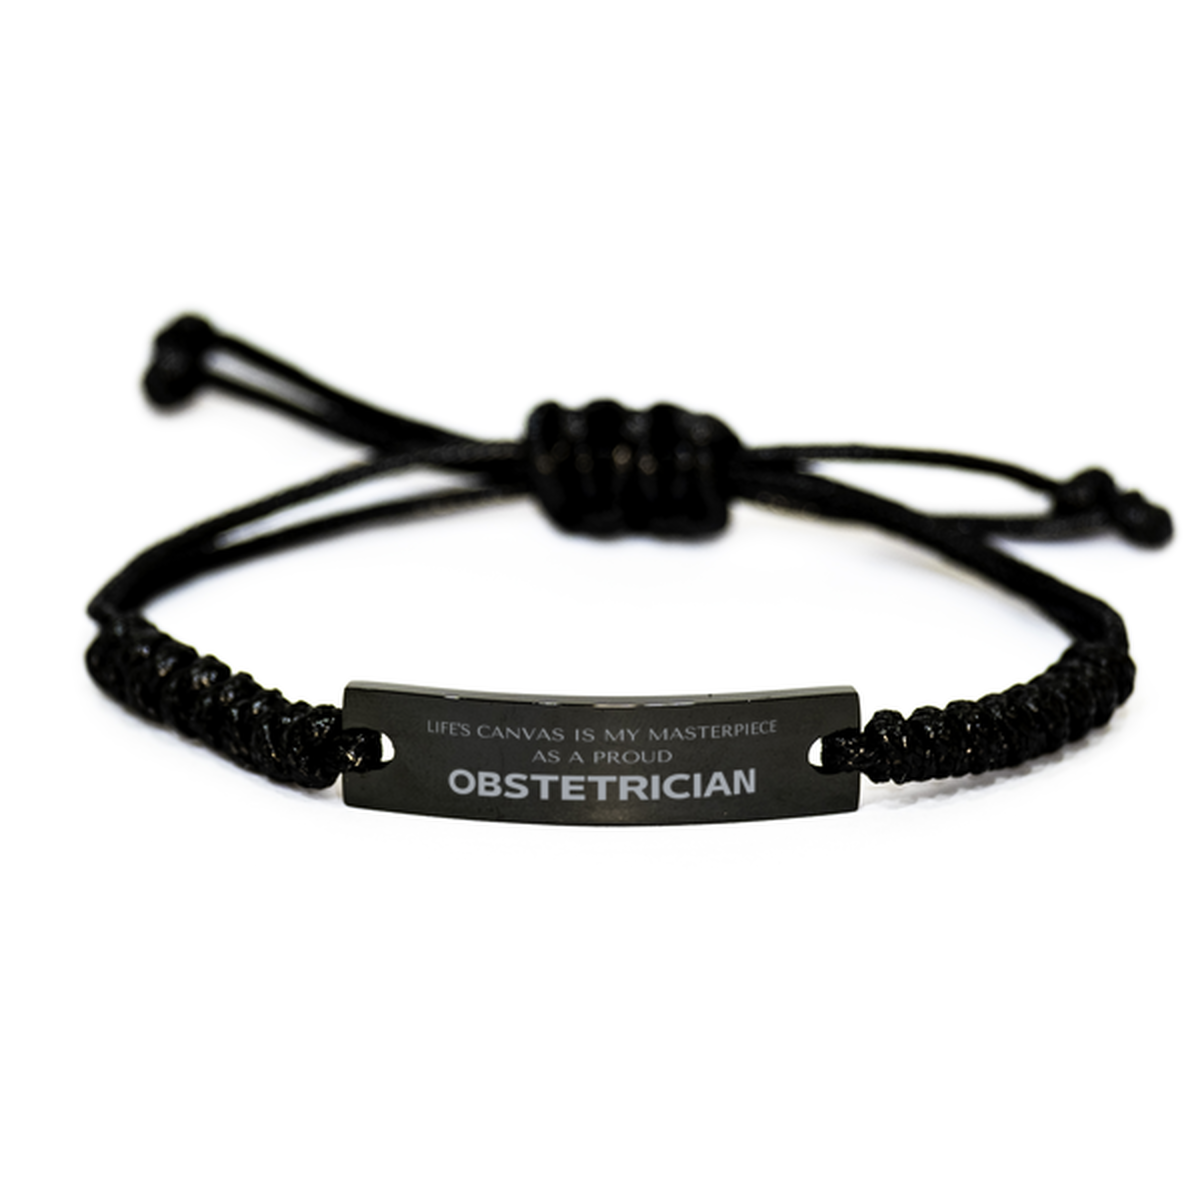 Proud Obstetrician Gifts, Life's canvas is my masterpiece, Epic Birthday Christmas Unique Black Rope Bracelet For Obstetrician, Coworkers, Men, Women, Friends